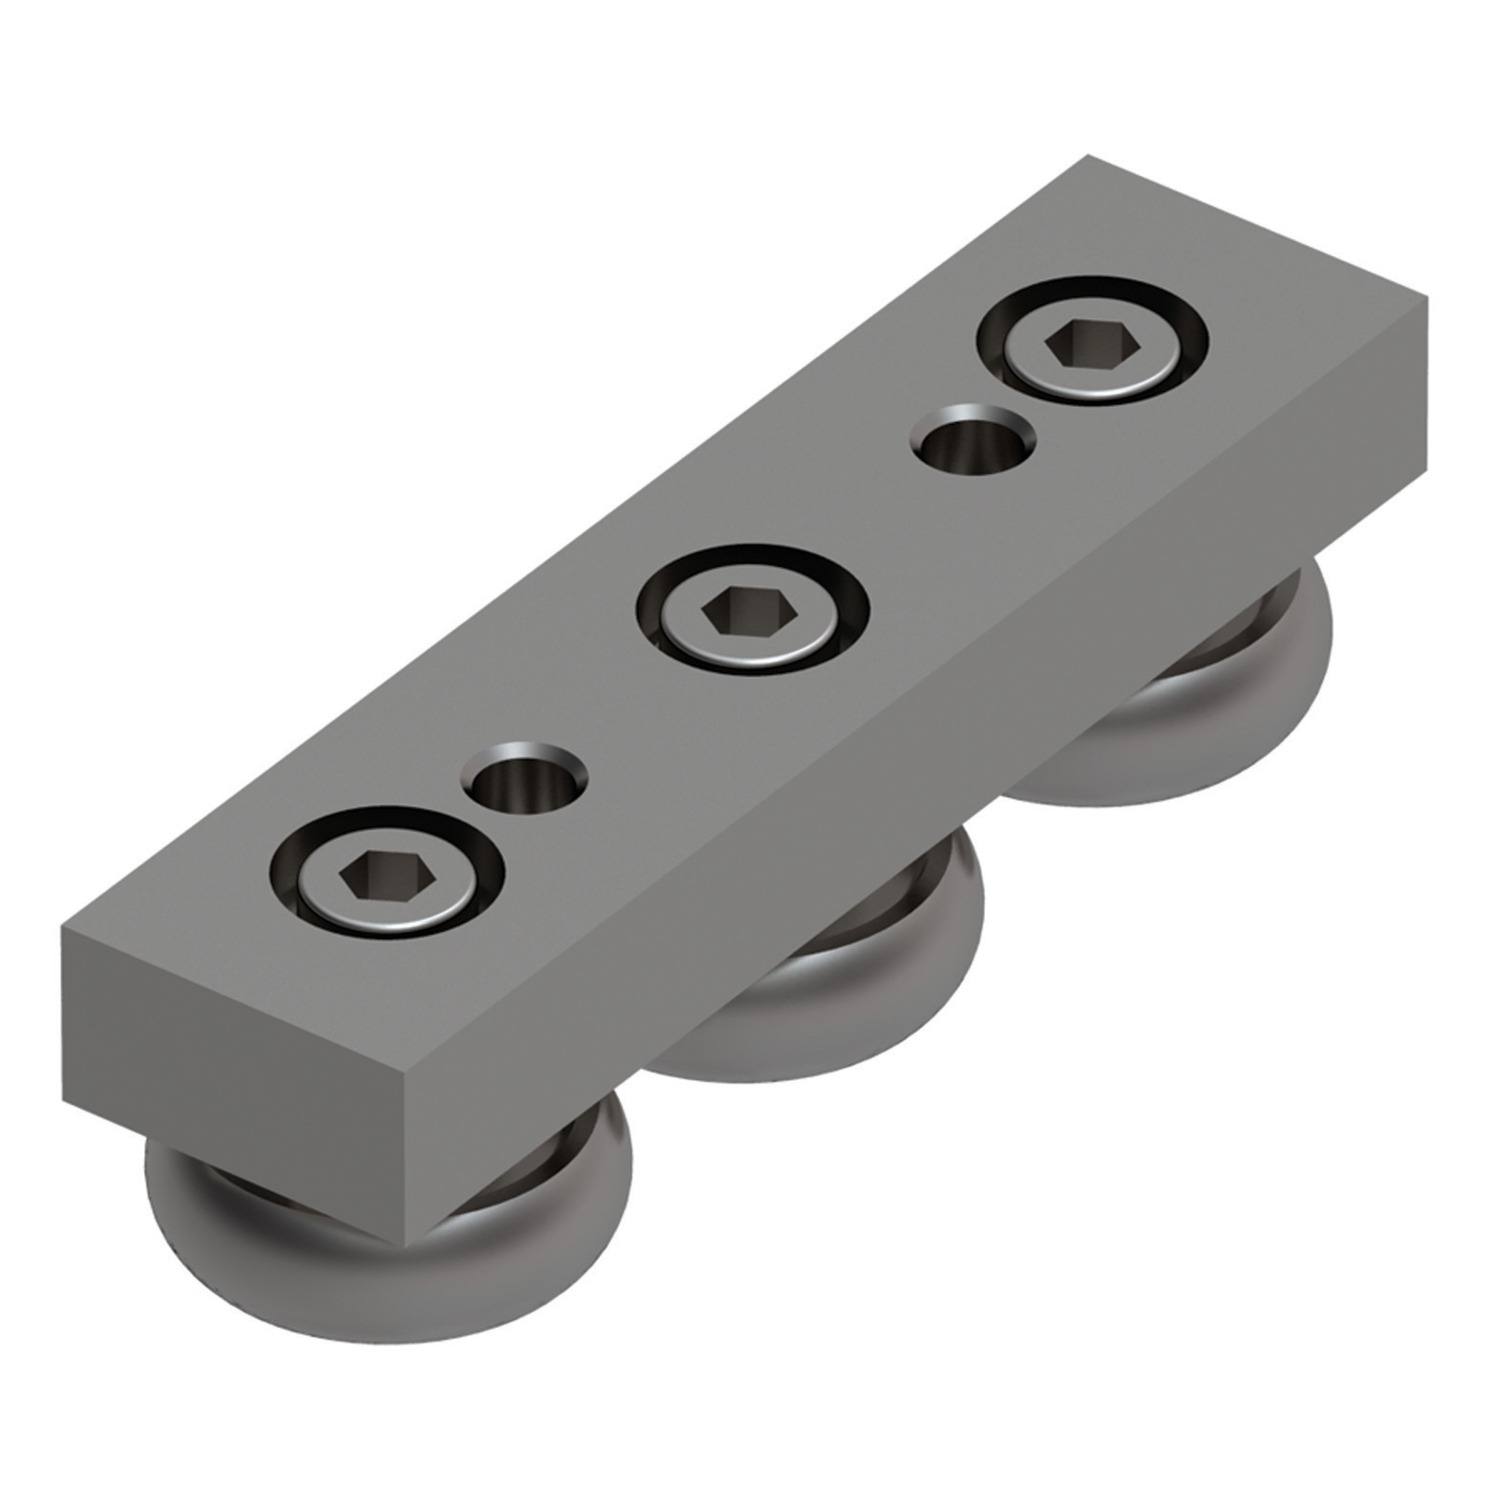 Product L1971.SB, Solid Body Stainless Sliders for U rail (slave) / 